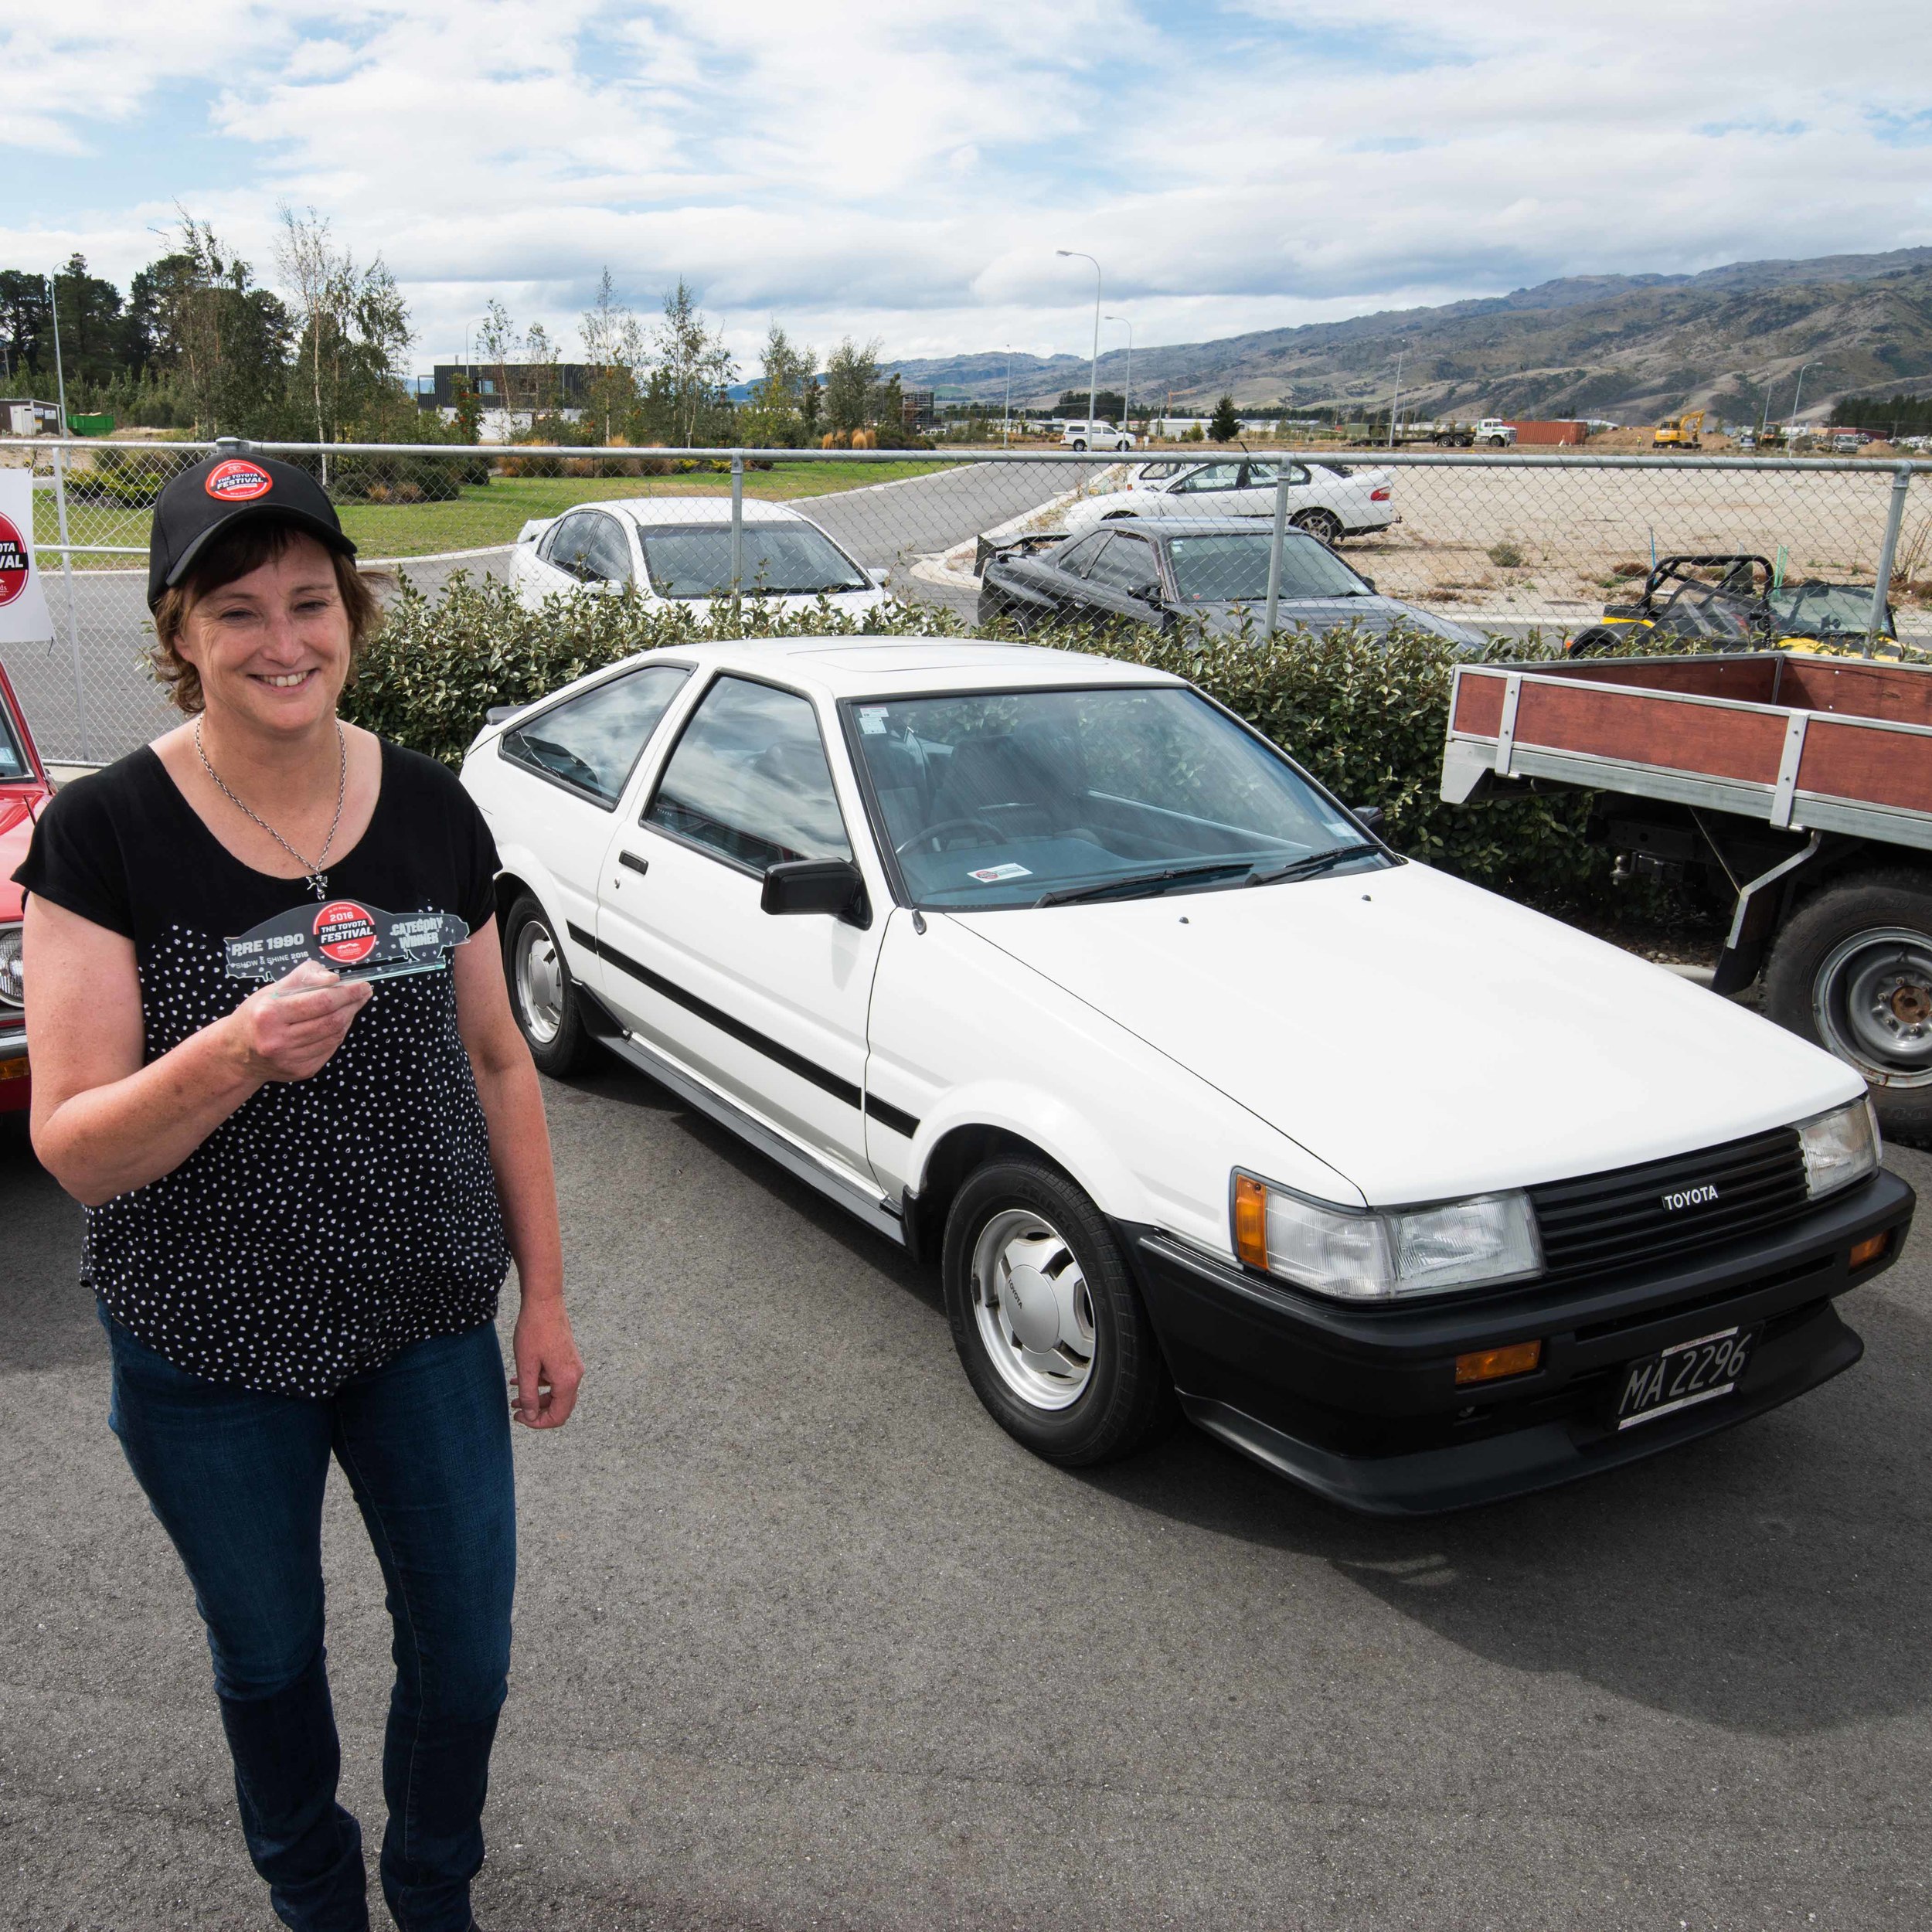 Trish Campbell and her pristine original AE86 which won the Pre-1990 category in the Show and Shine competition .jpg